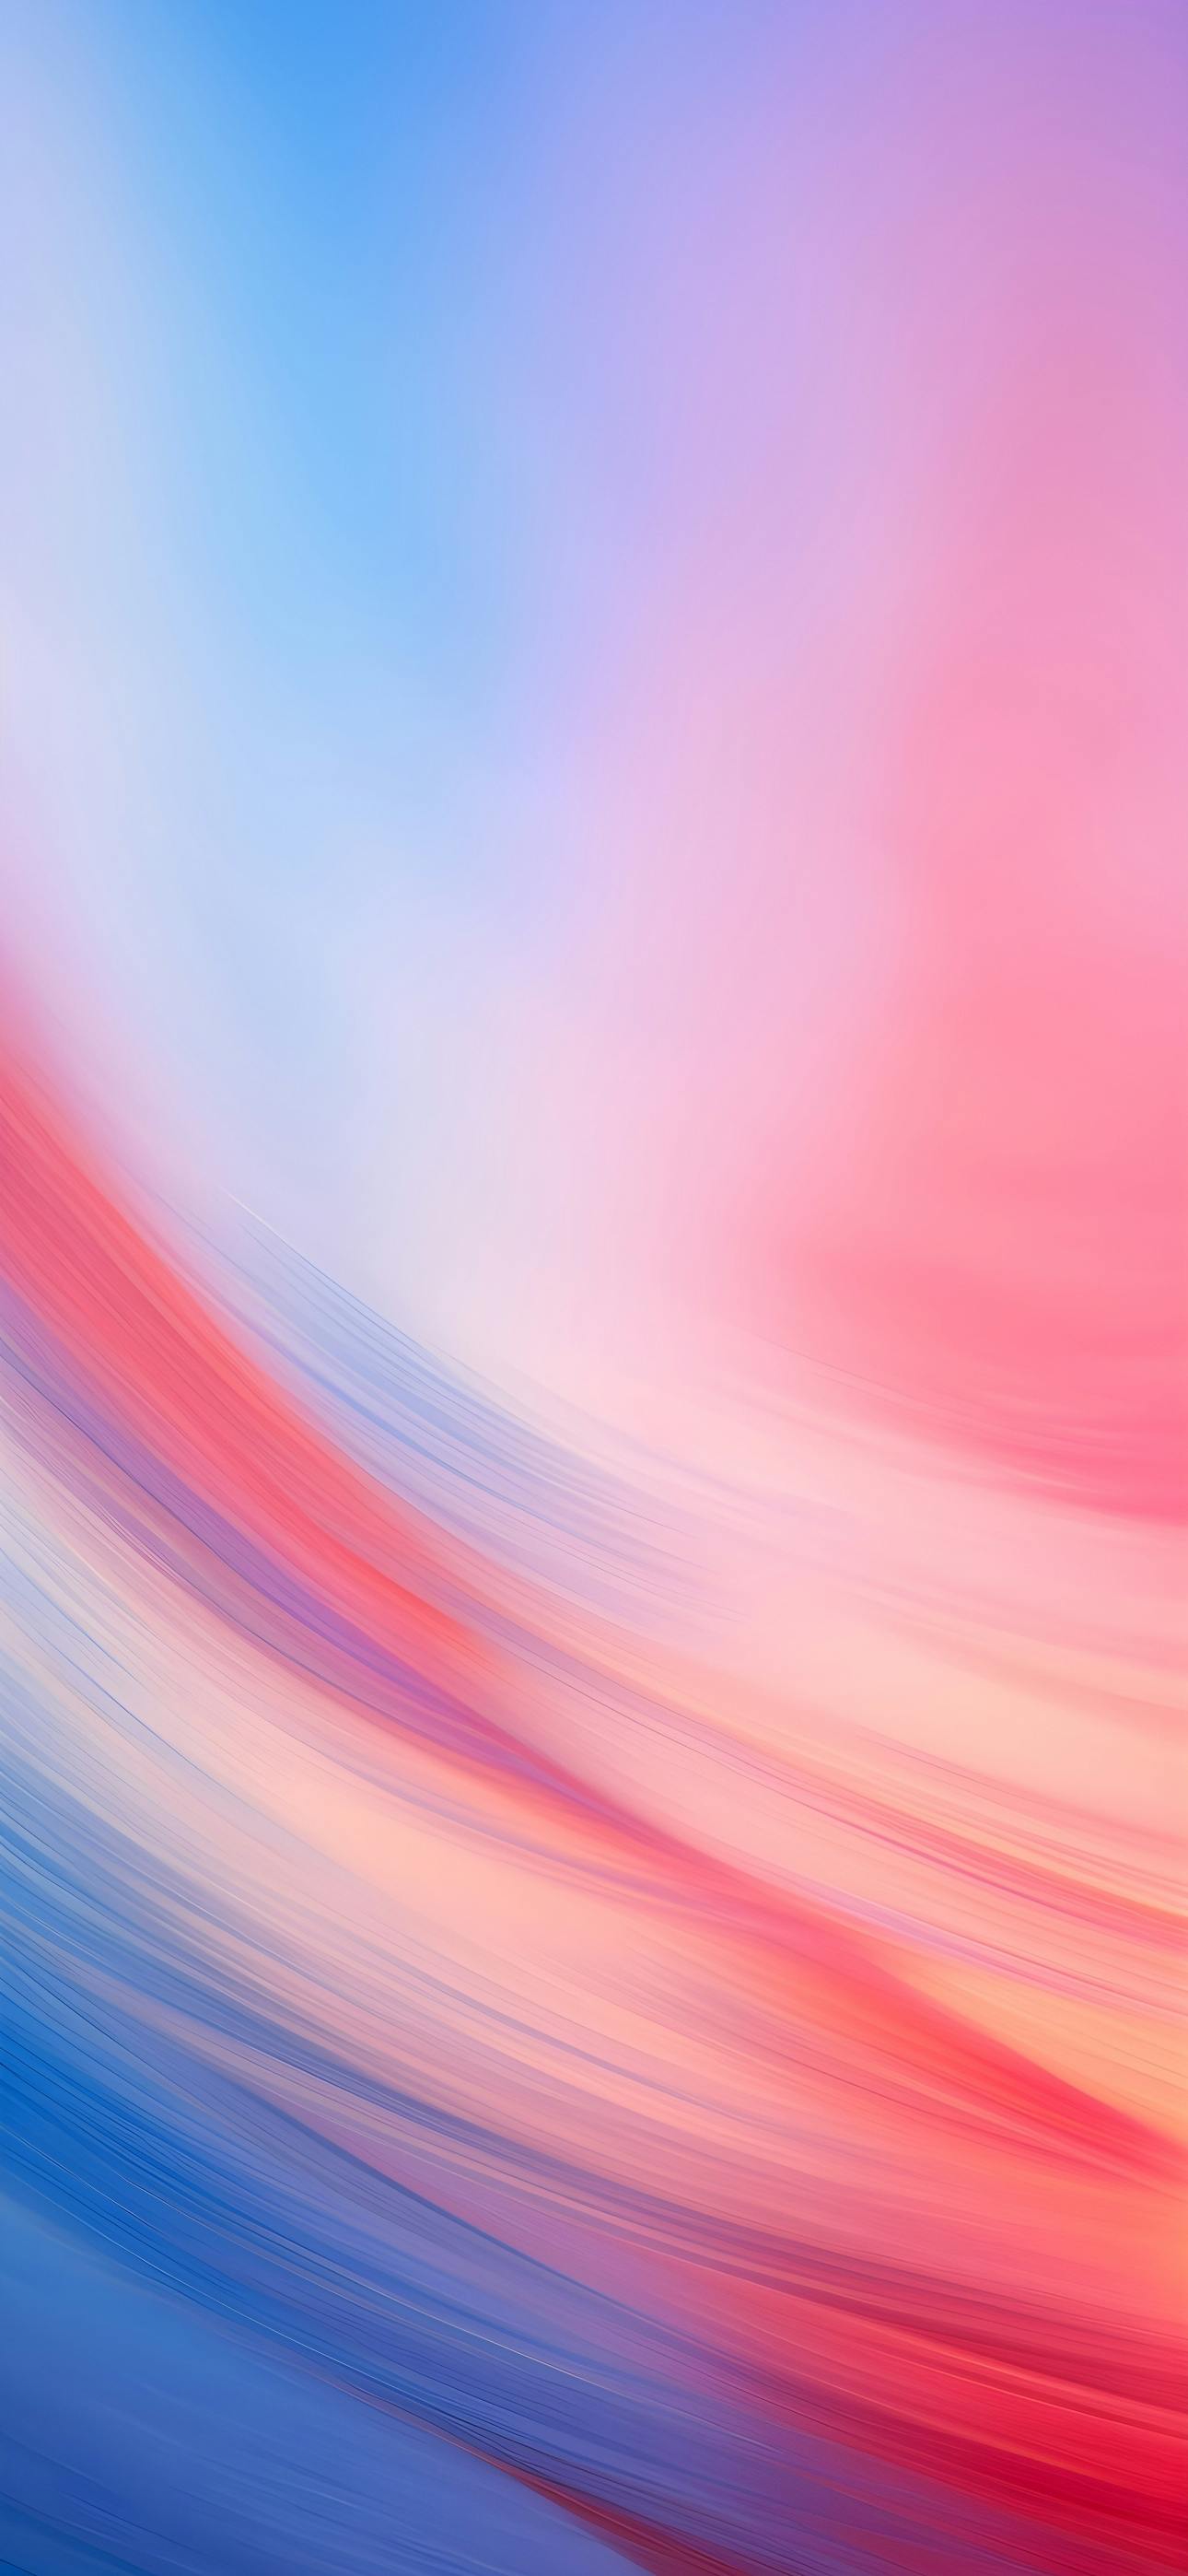 Tropical Sunset gradient wallpaper for iPhone